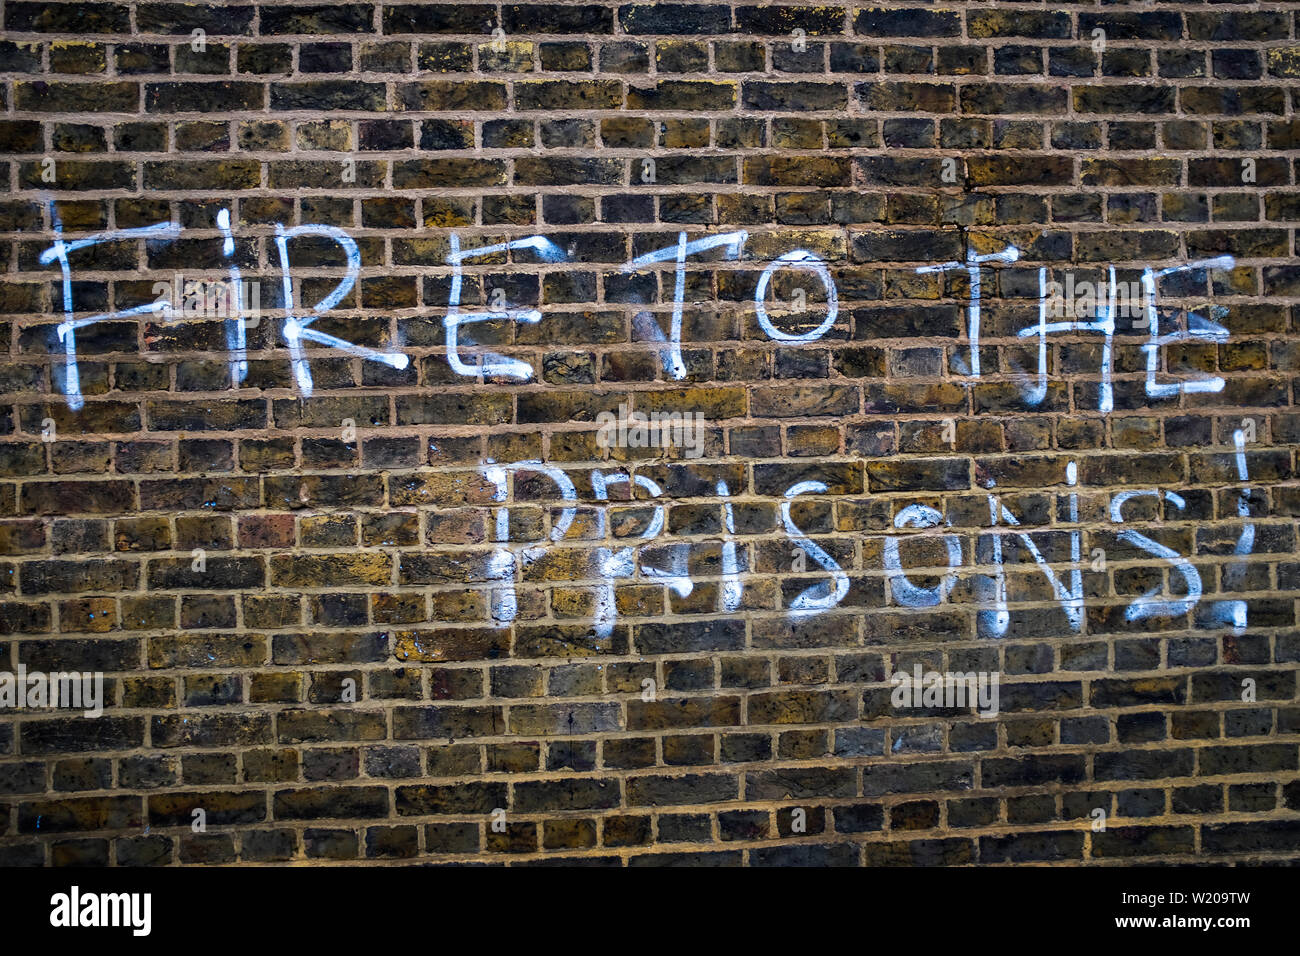 Fire to the Prisons graffiti spray-painted on Brixton Prison, Brixton, England. Stock Photo